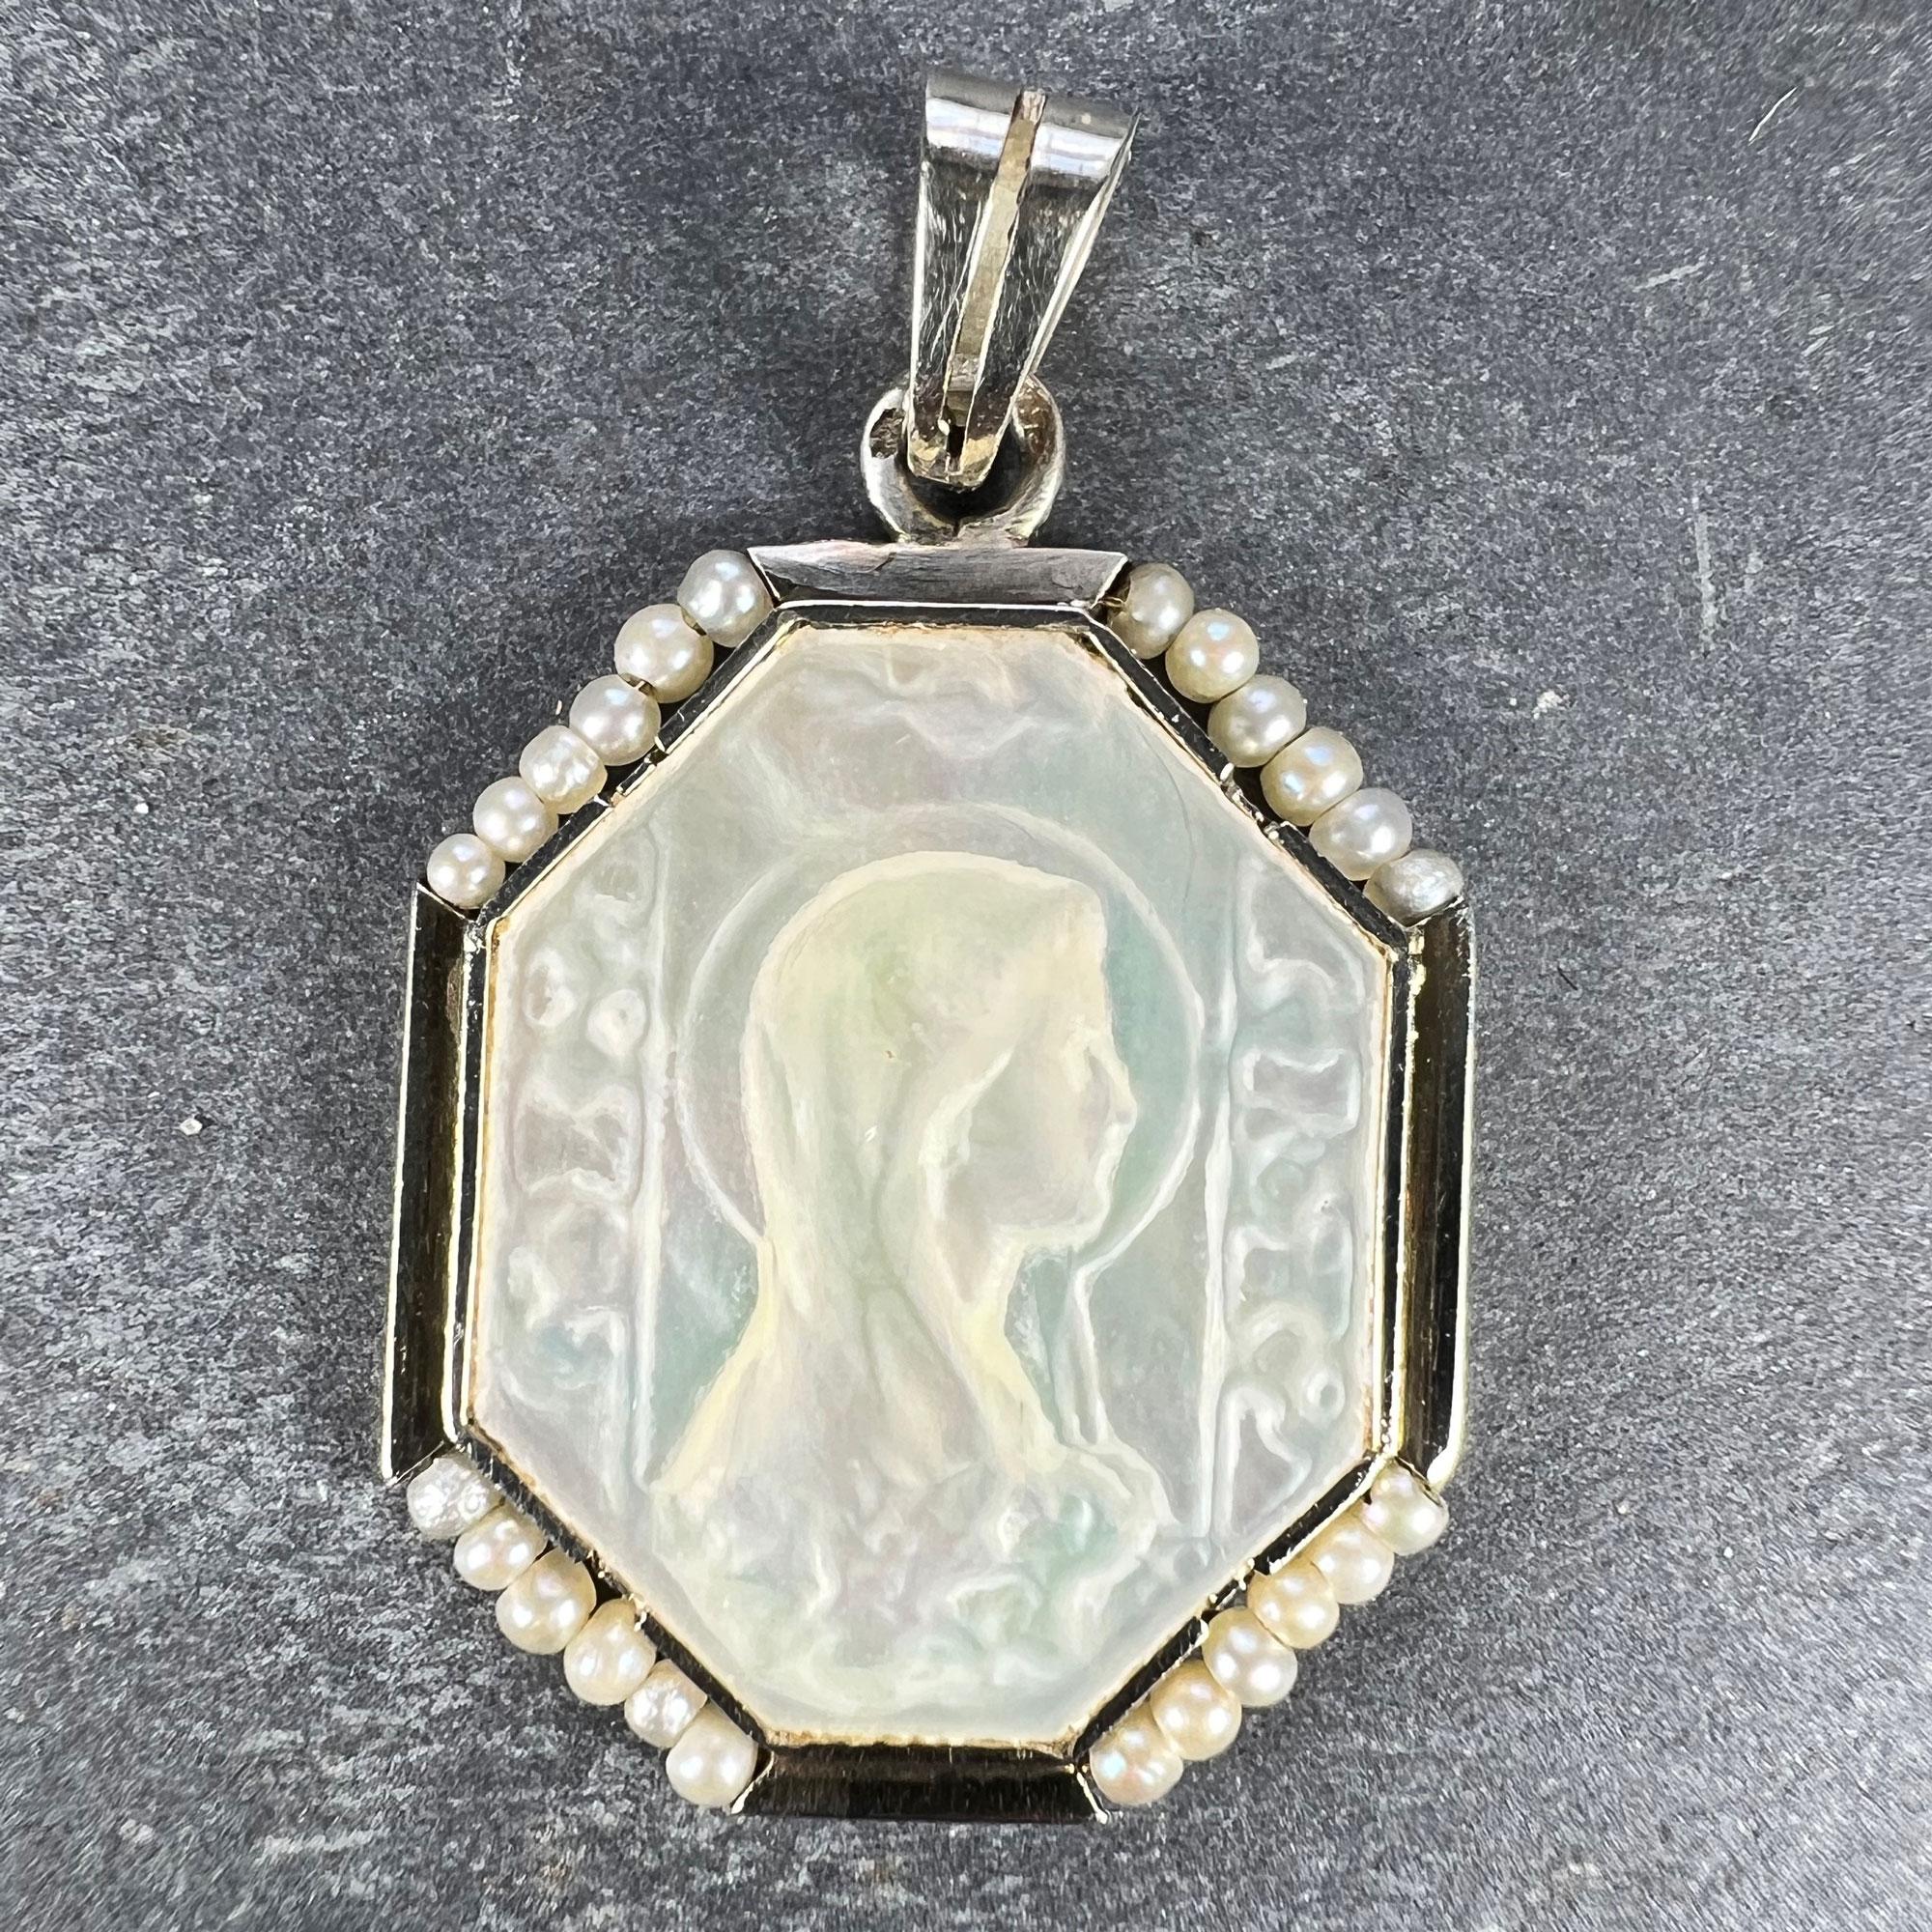 A French 18 karat (18K) white gold charm pendant designed as a mother-of-pearl medal depicting the Virgin Mary surrounded by 24natural seed pearls. Stamped with the eagle mark for 18 karat gold and French manufacture and an unknown maker’s